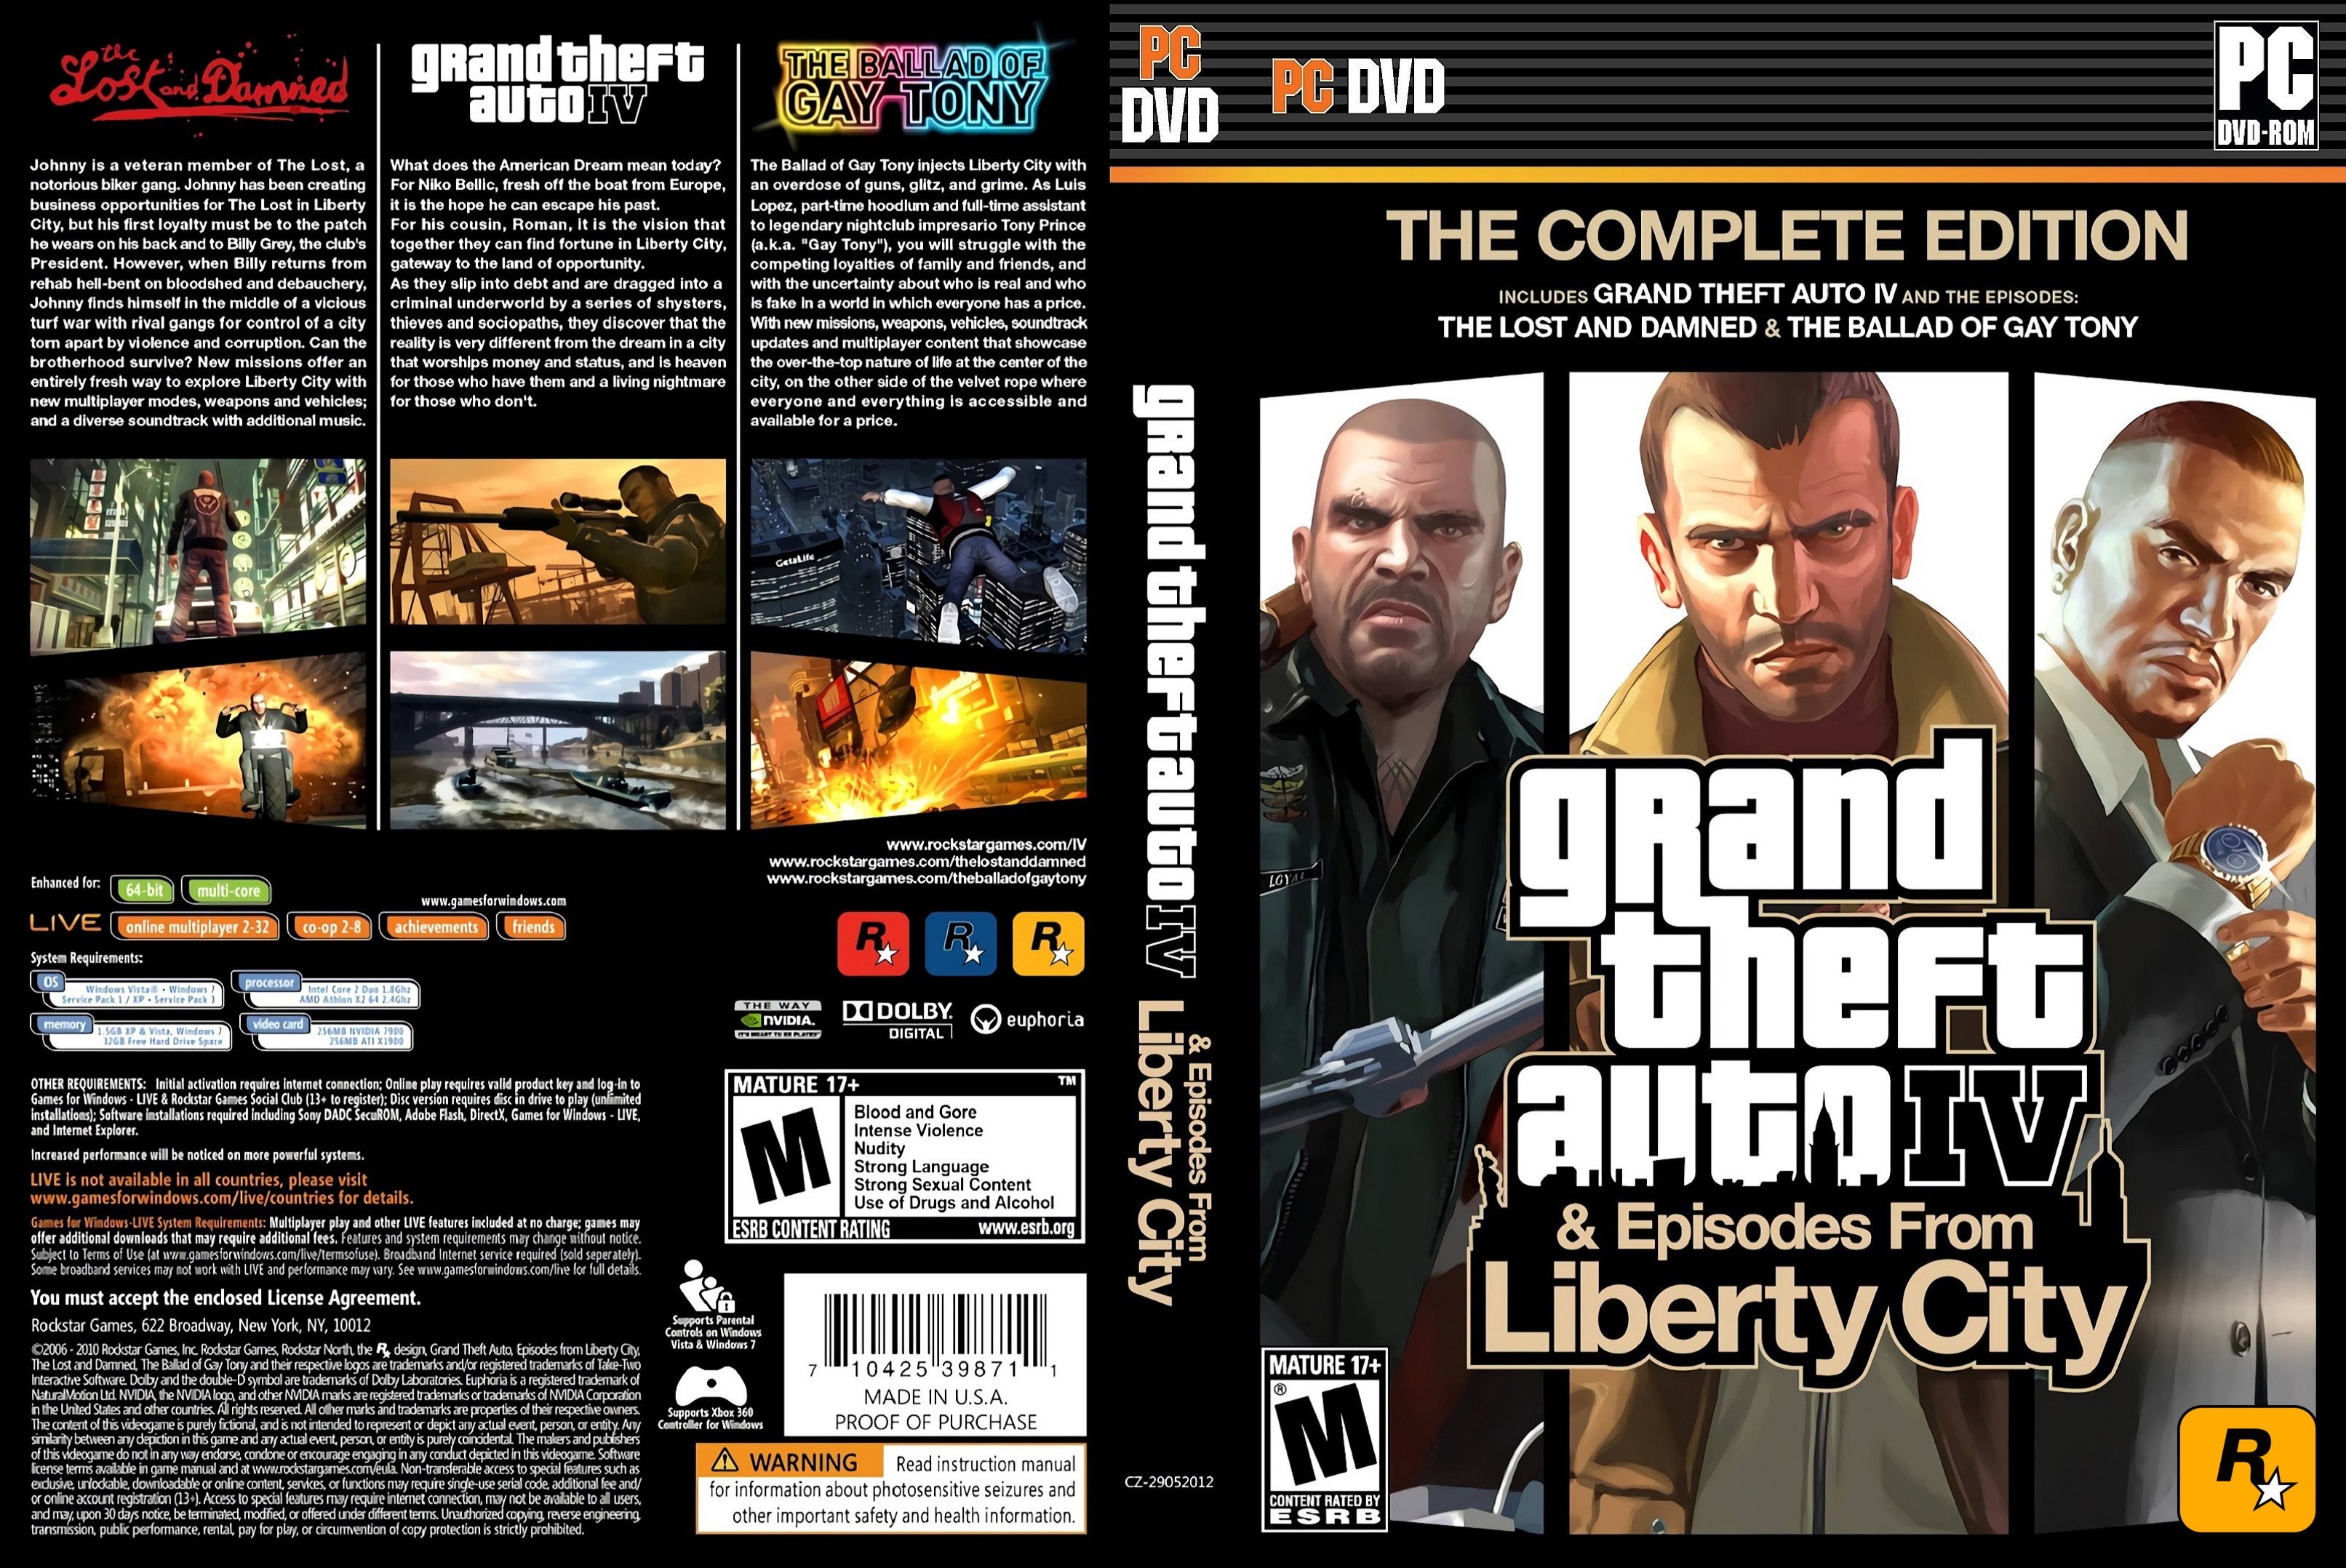 Grand Theft Auto IV - The Complete Edition (2010) PC version modding |  GBAtemp.net - The Independent Video Game Community